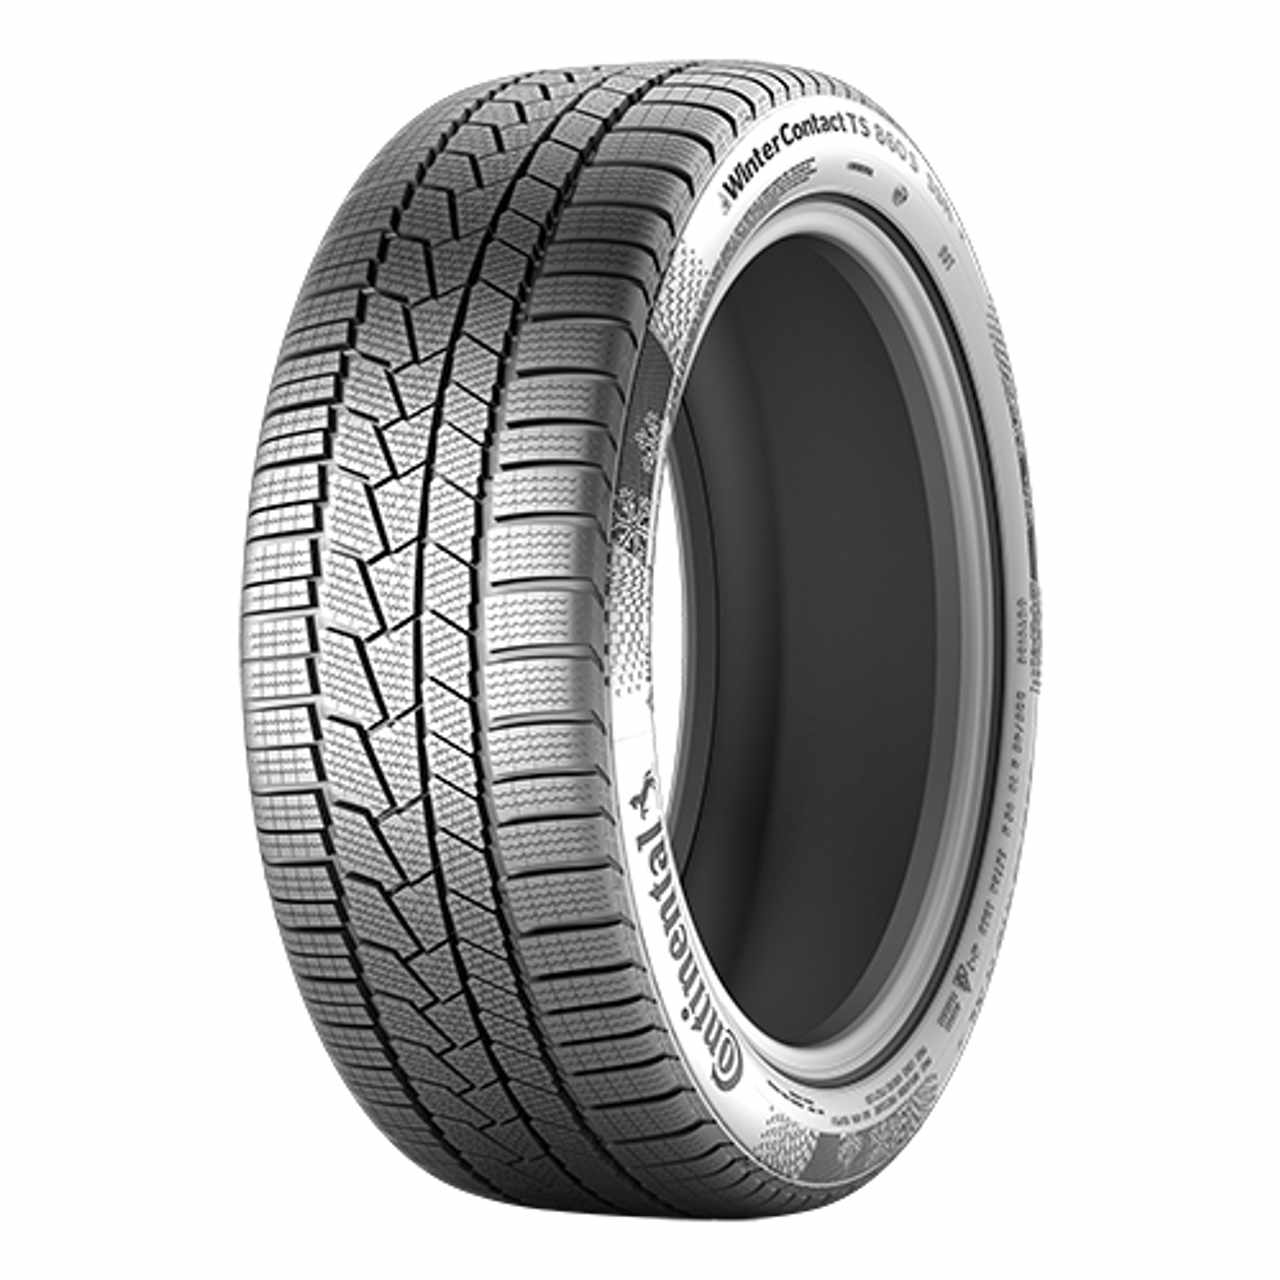 CONTINENTAL WINTERCONTACT TS 860 S (*) (EVc) SSR 205/55R16 91H BSW von Continental